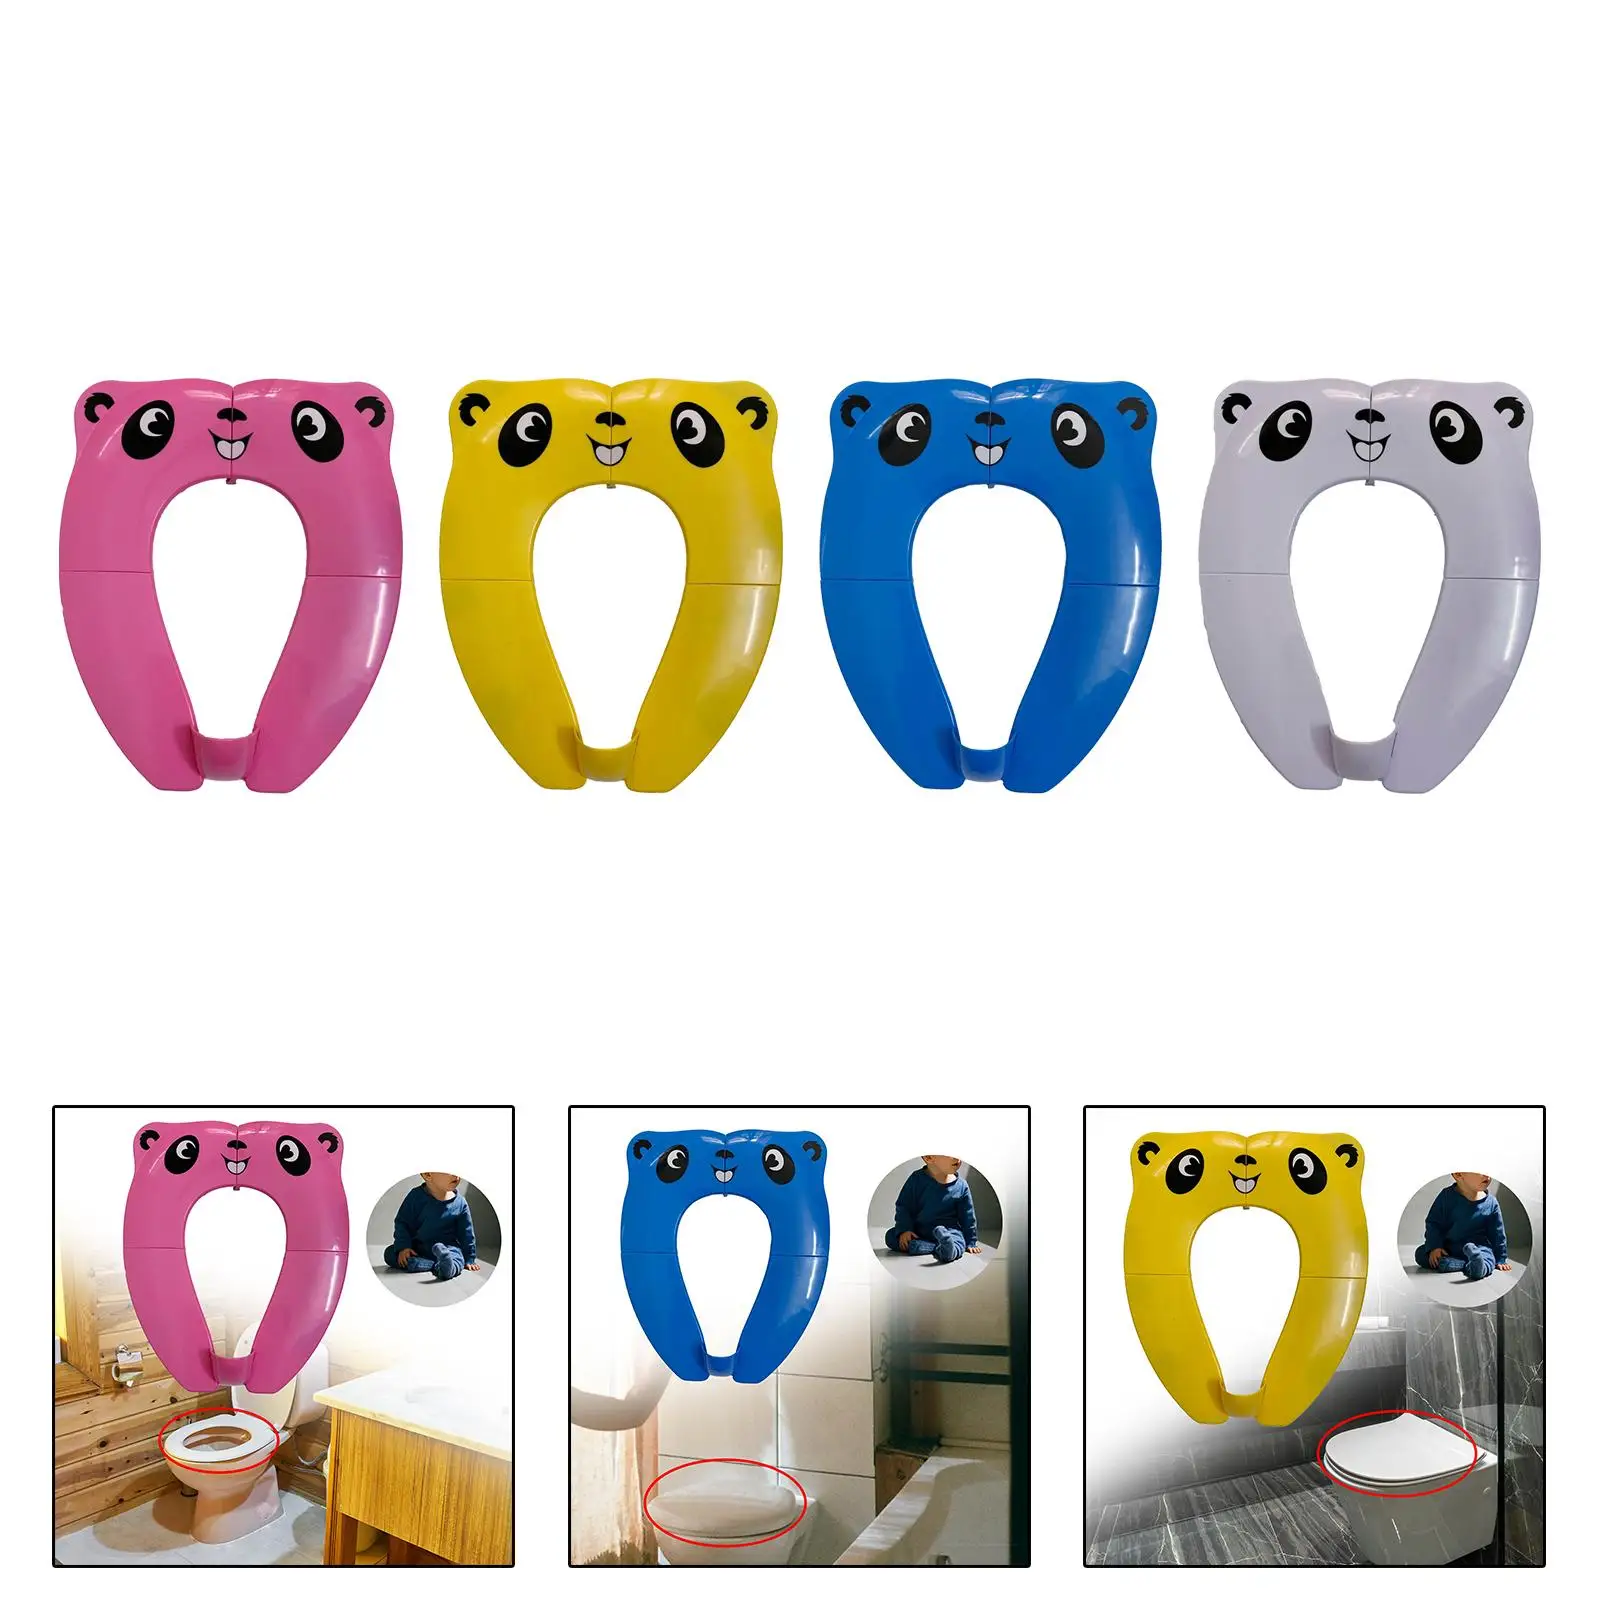 Foldable Travel Potty Seat Toilet Training Potty Seat Cover Non Slip Cushion for Household Toddlers Boys Kids Girls